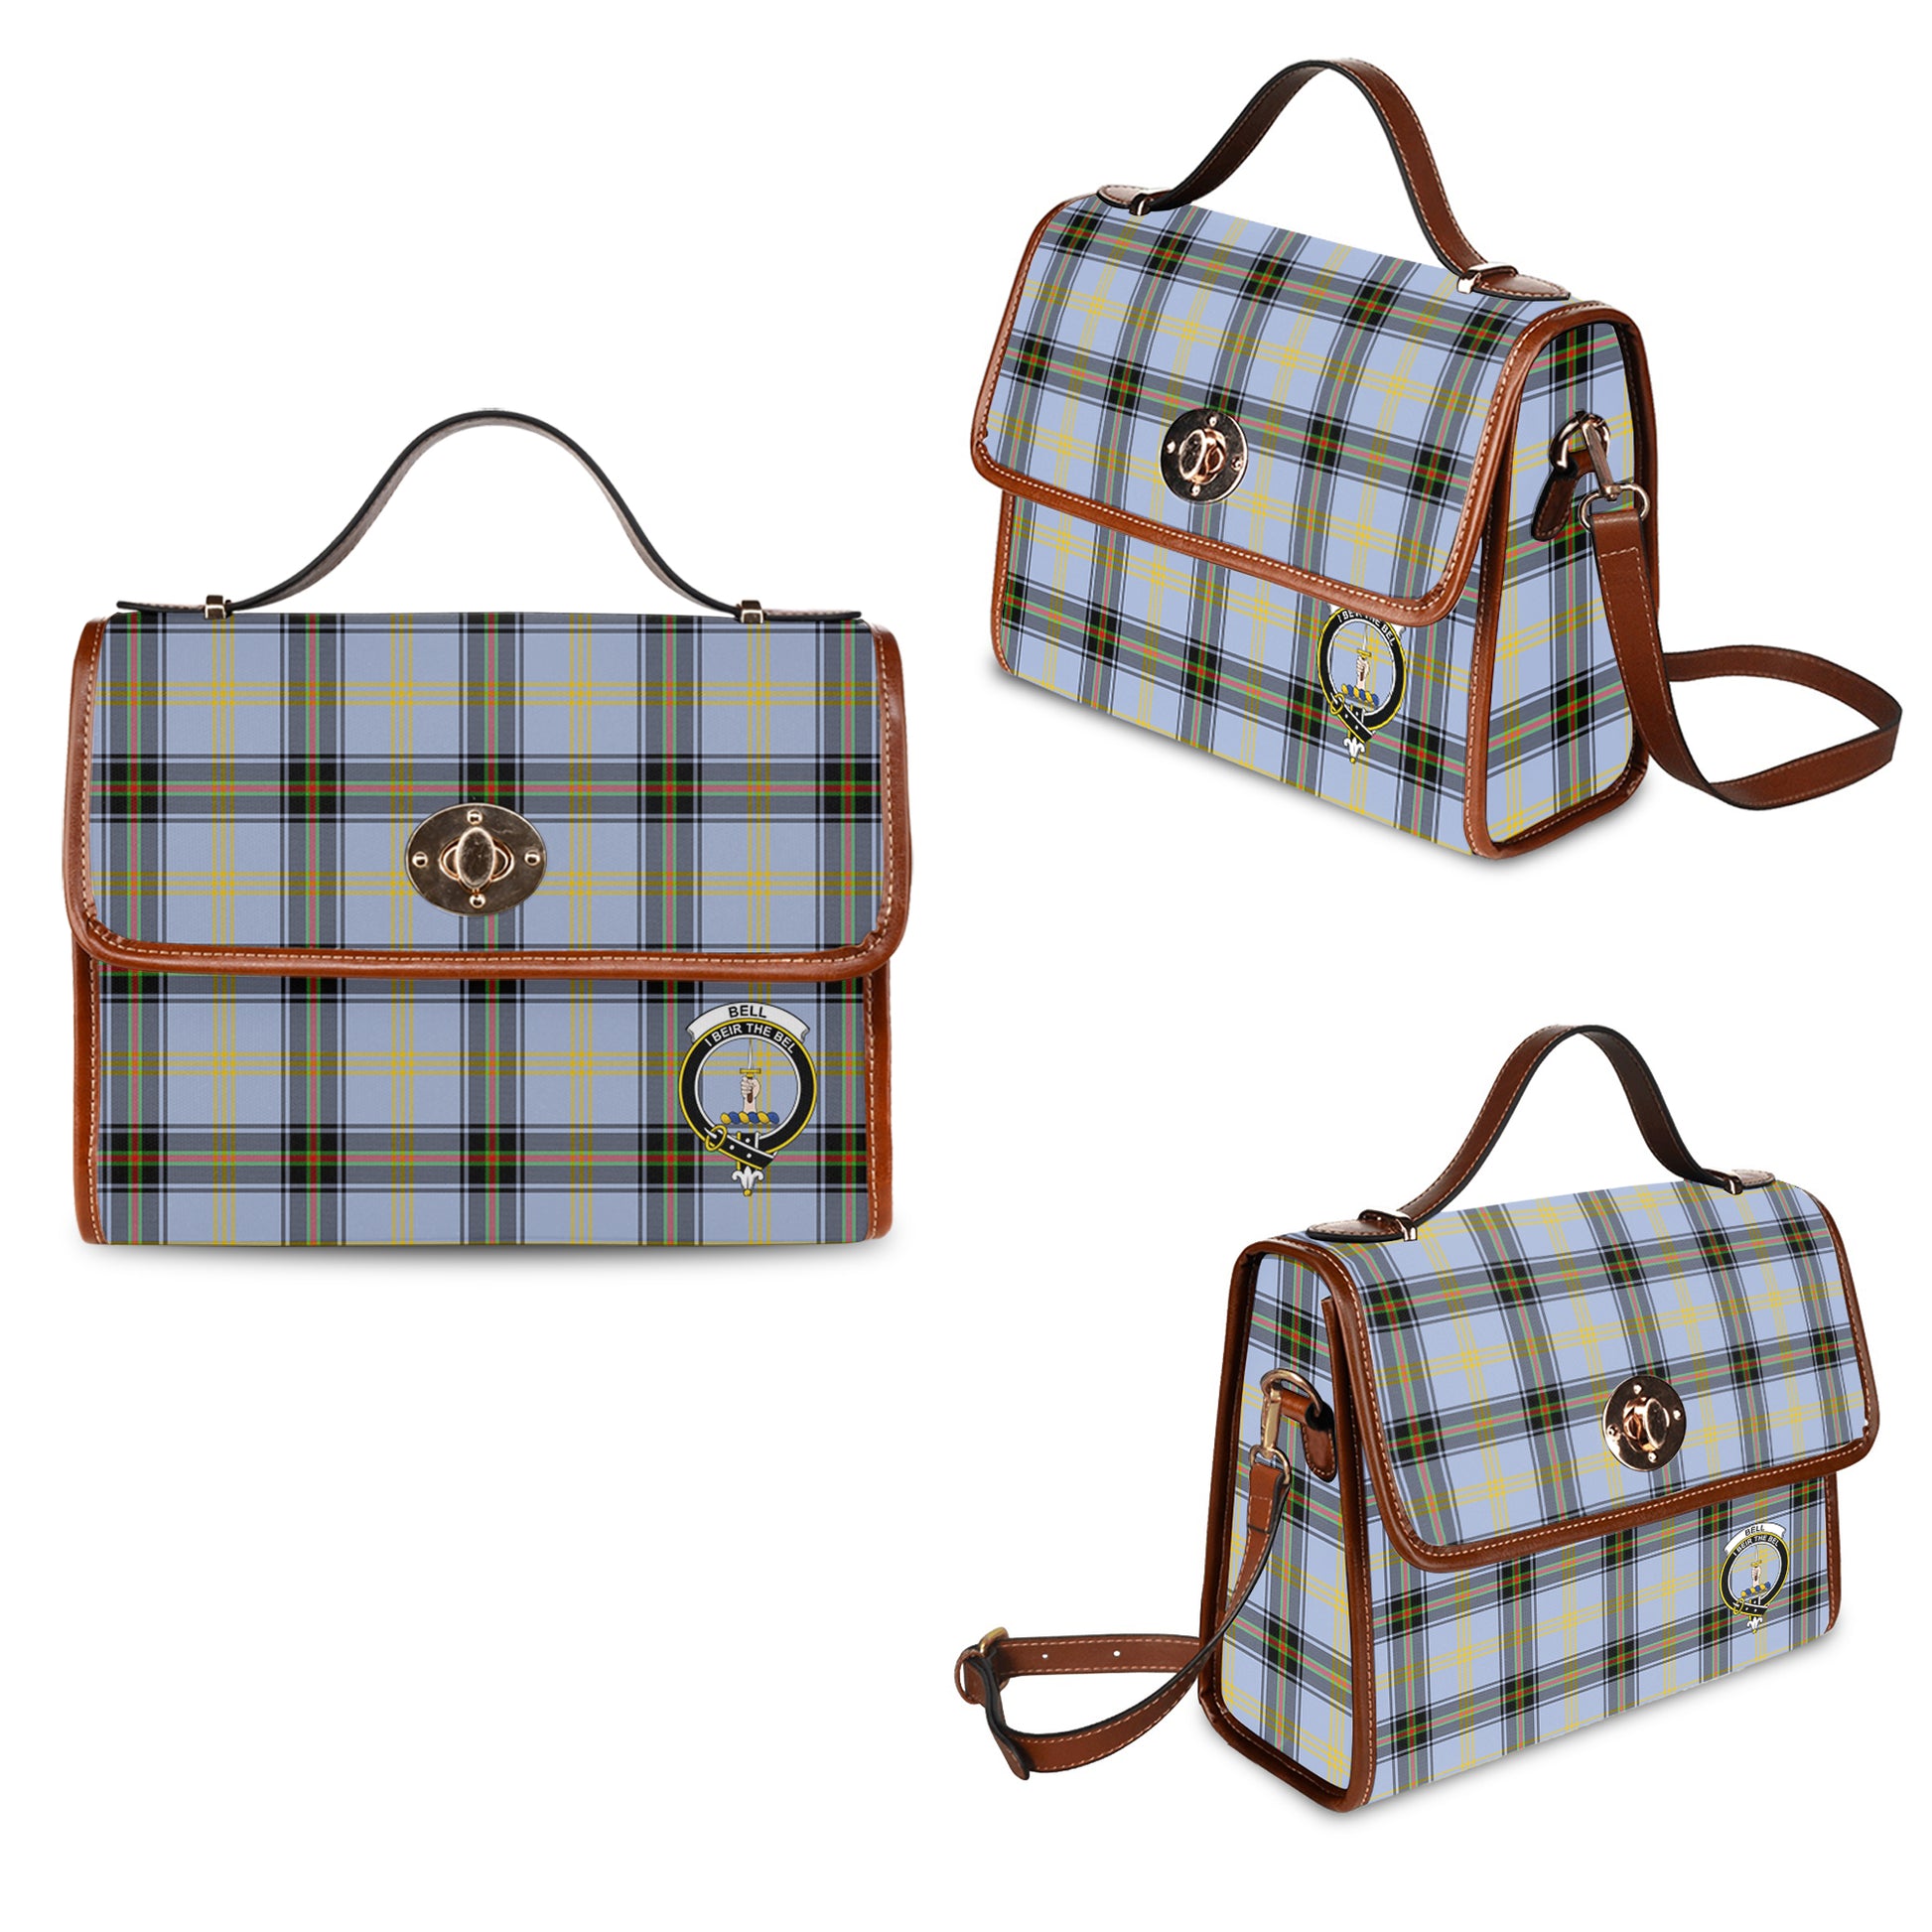 Bell Tartan Leather Strap Waterproof Canvas Bag with Family Crest One Size 34cm * 42cm (13.4" x 16.5") - Tartanvibesclothing